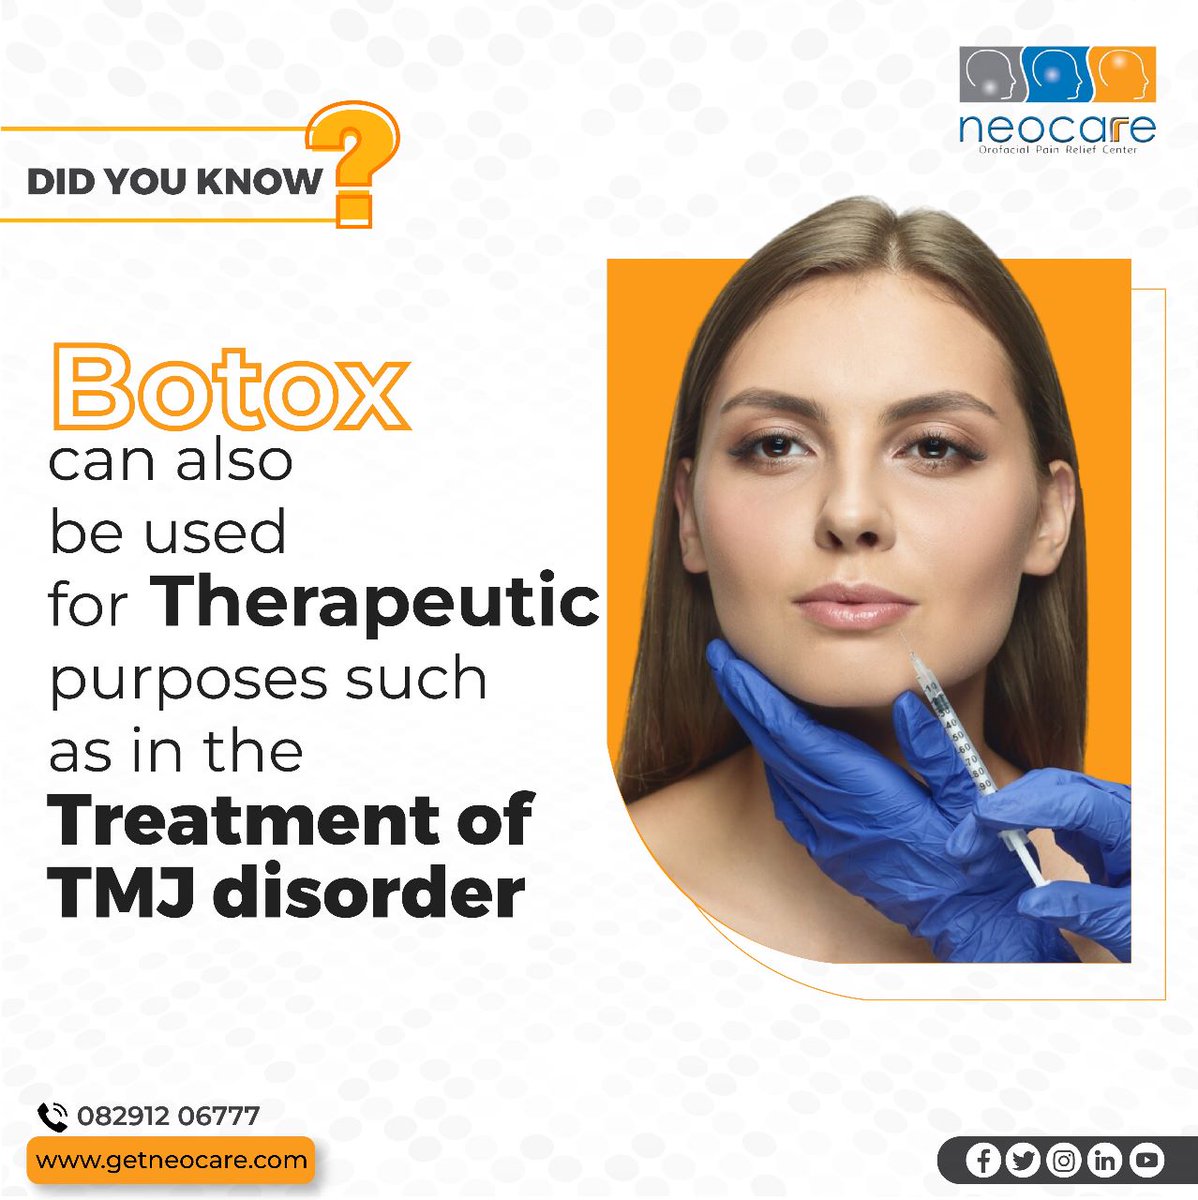 That’s right ! Botox can also be used for therapeutic purposes such as in the treatment of TMJ disorder. ​​​​​​​​​#neocare #jawpain #pain #relief #care #nervepain #musclepain #careforyou #botox ##medical #wellness #orafacialpain #facialpain #headache